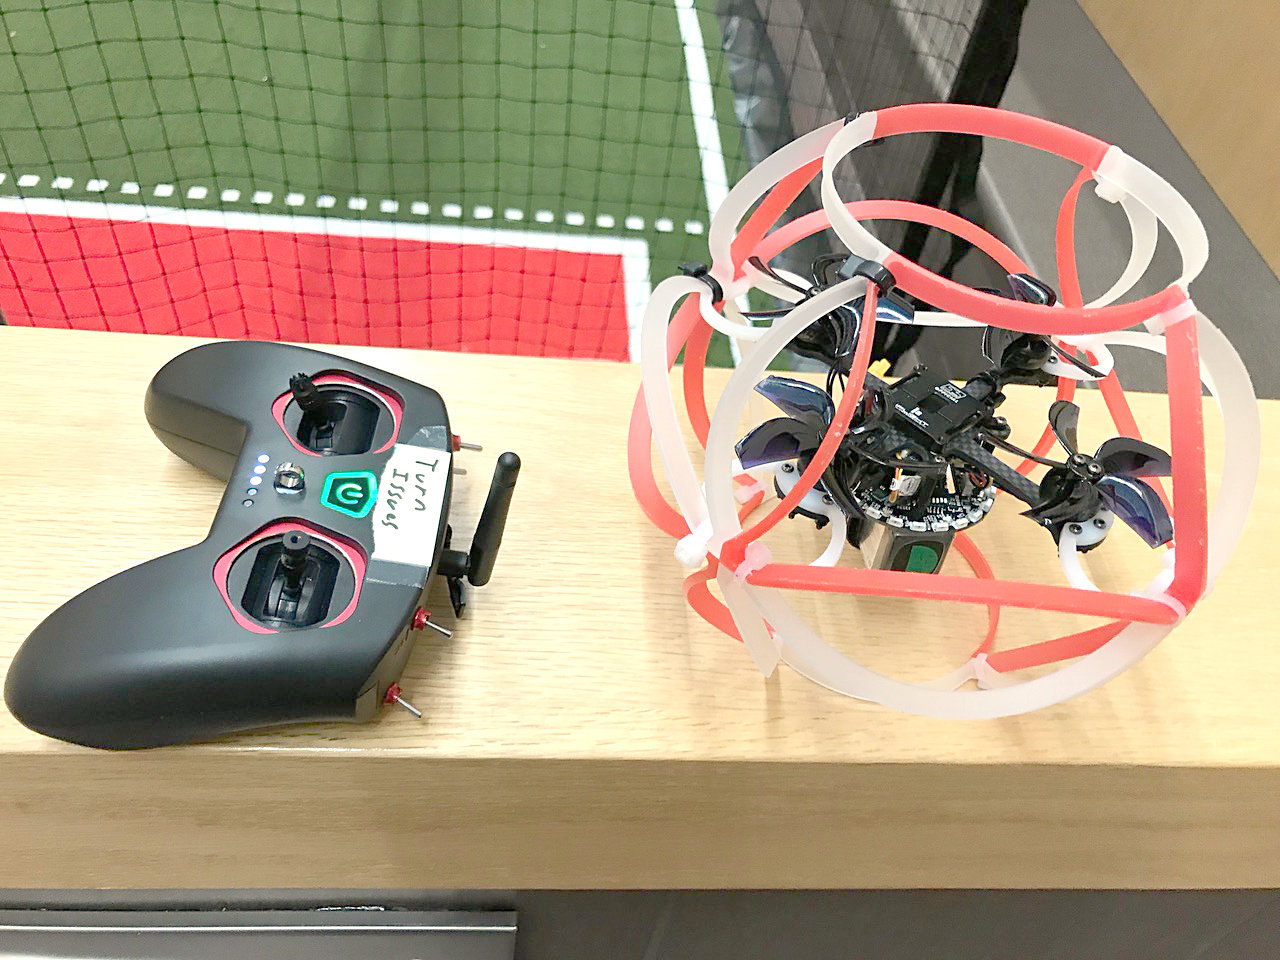 A remote control, left, and the flying quadcopter drone it flies are seen Monday, Feb. 13 during a special presentation by the Drone Soccer Club cooperative program between the Rome City School District and Mohawk Valley Community College for the district's Board of Education.